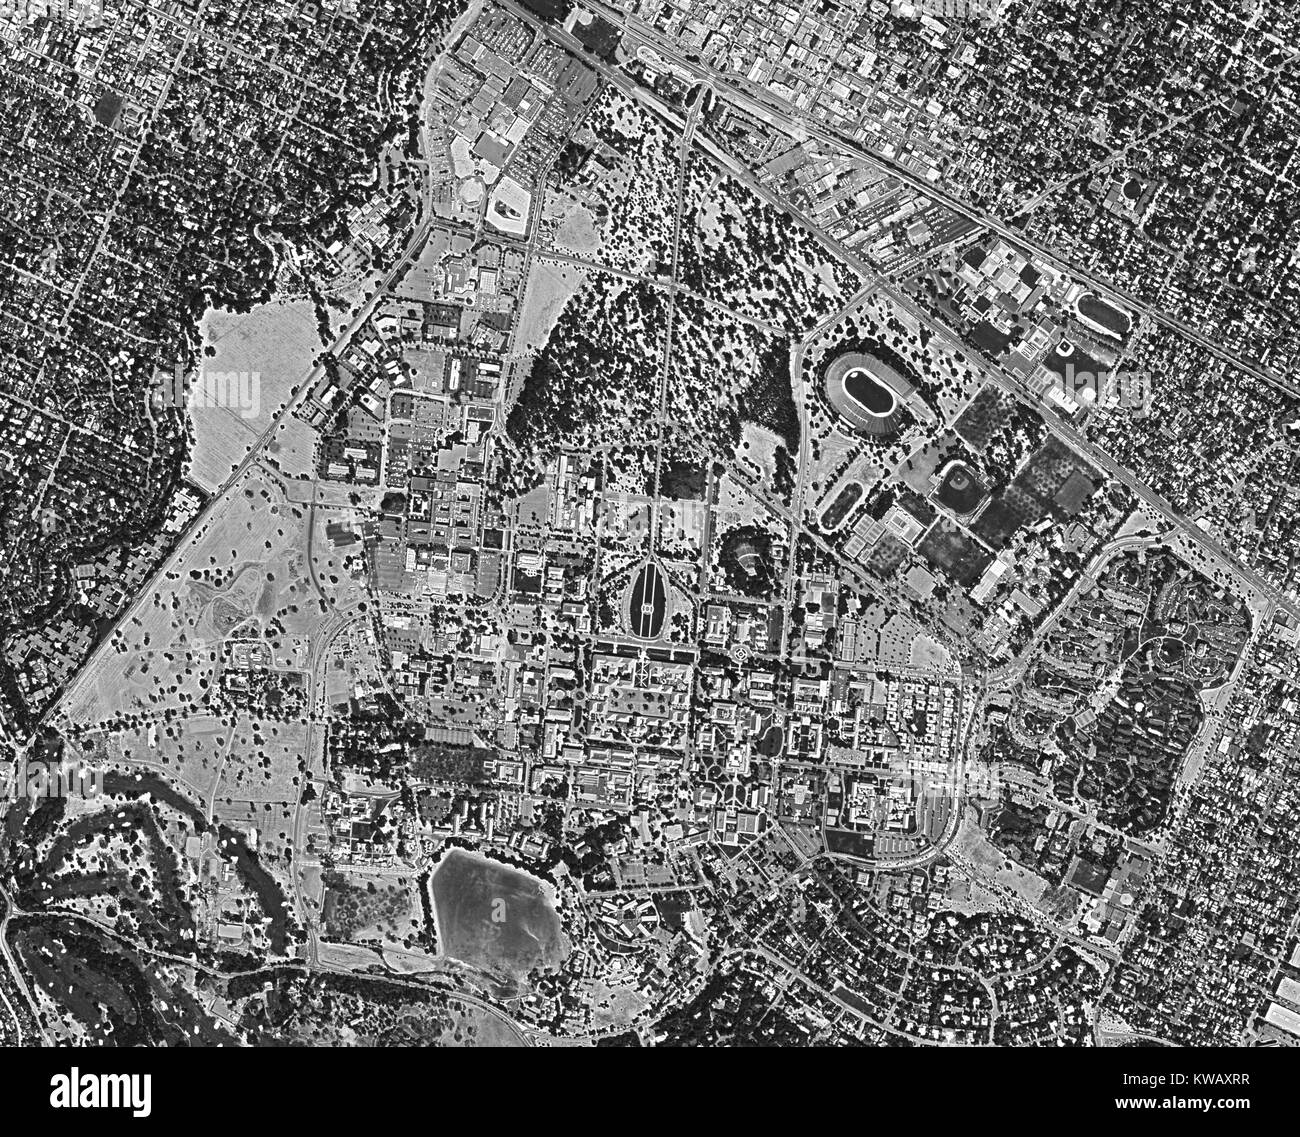 Declassified reconnaissance satellite view, taken by the Central Intelligence Agency's (CIA) Keyhole (AKA Corona or Discoverer) spy satellite of Stanford University and a portion of University Avenue in the Silicon Valley town of Palo Alto, California, September, 1984. Stock Photo